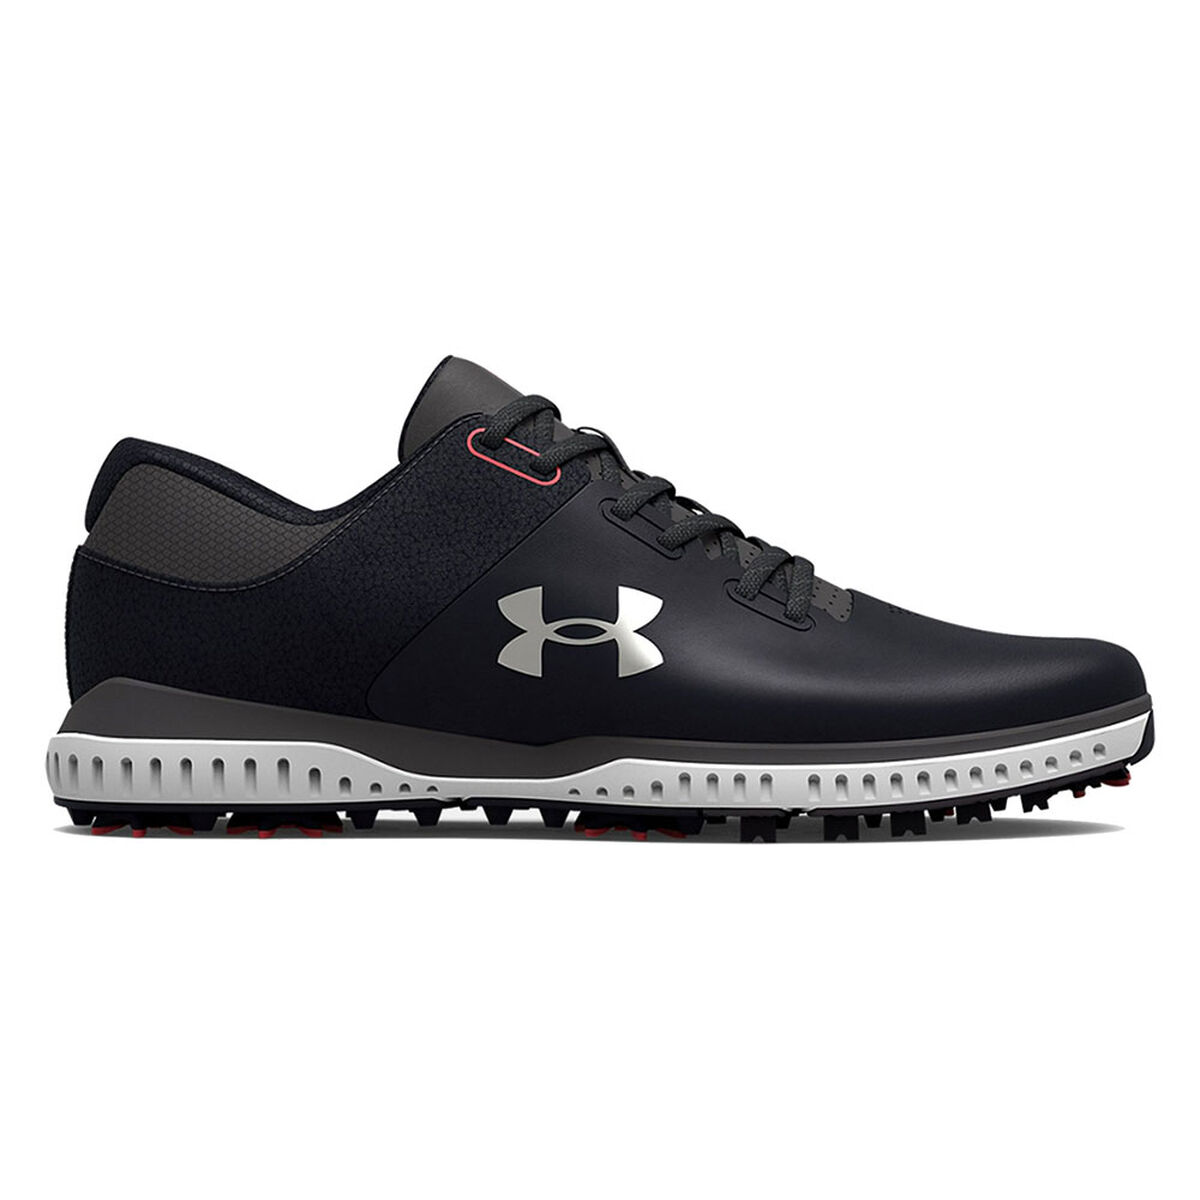 Under Armour Men’s Medal RST Waterproof Spiked Golf Shoes, Mens, Black, 8 | American Golf